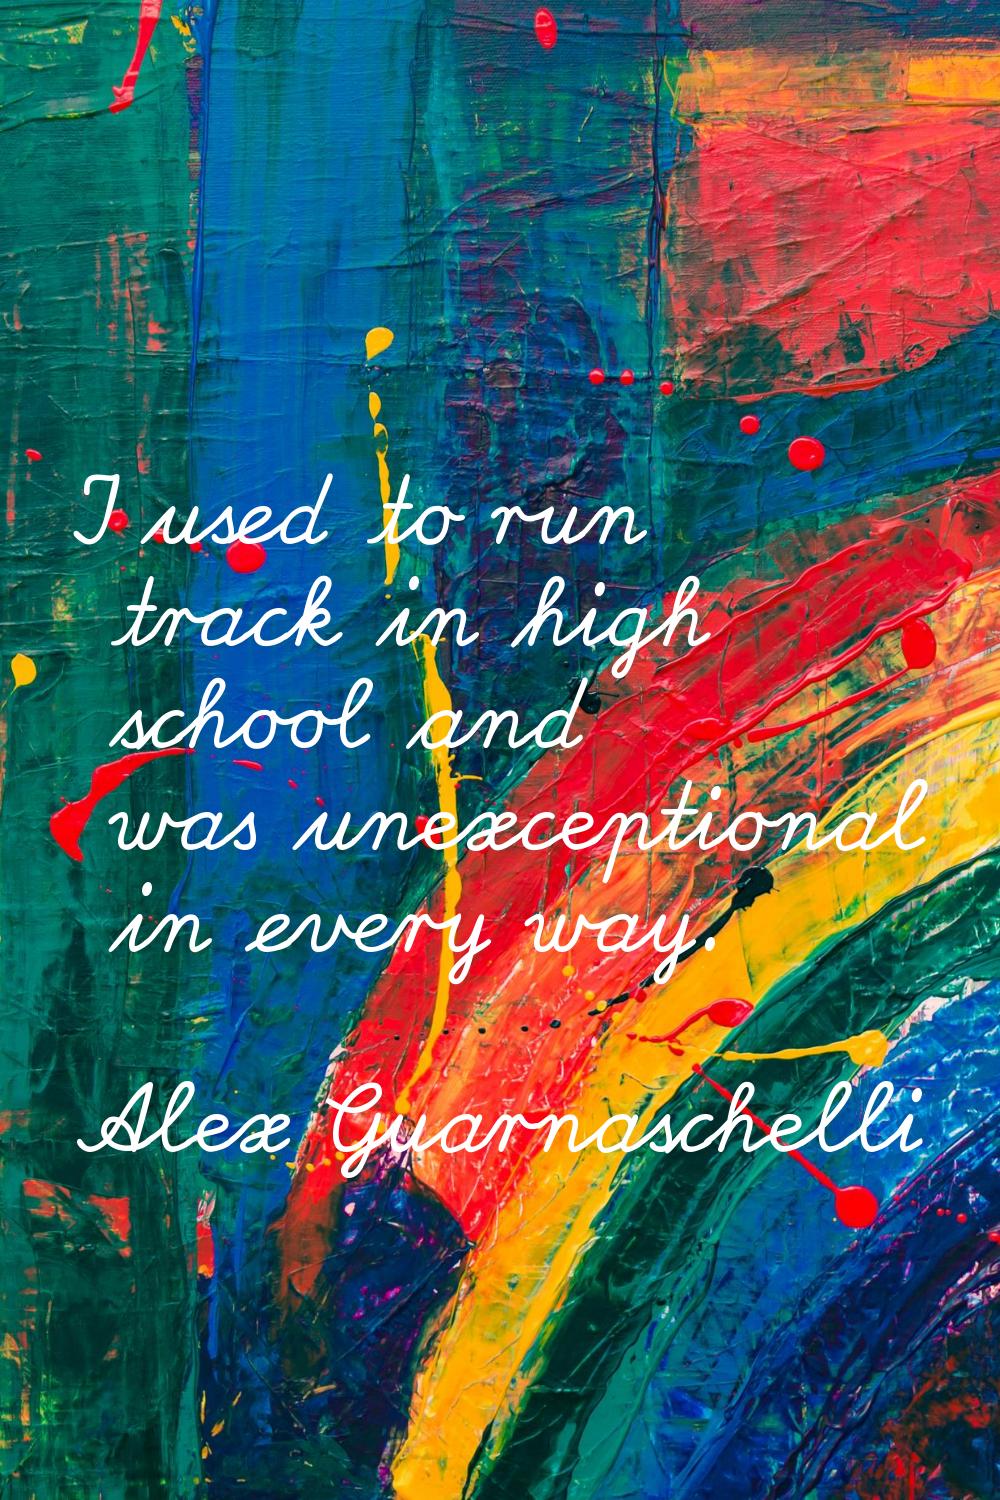 I used to run track in high school and was unexceptional in every way.